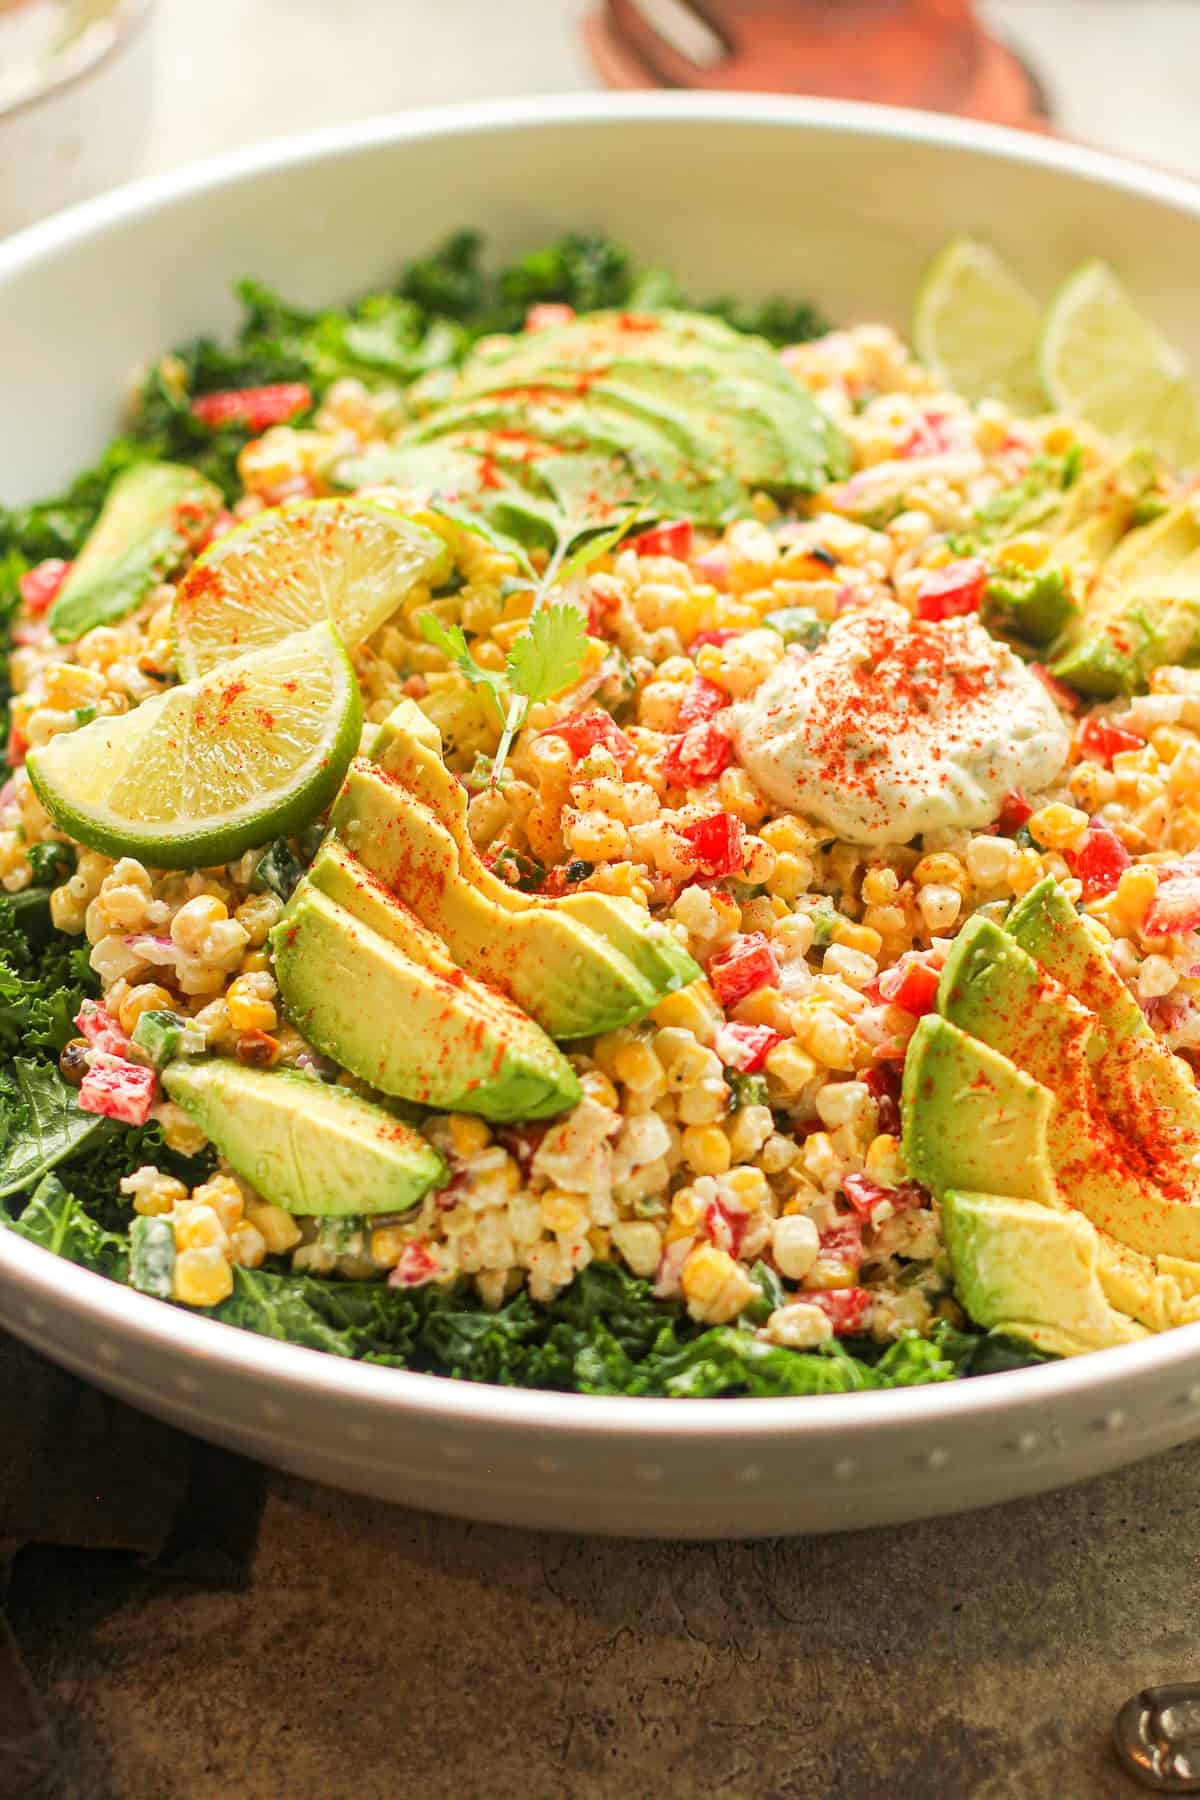 Side view of a large bowl of Mexican street corn kale salad with avocado slices.